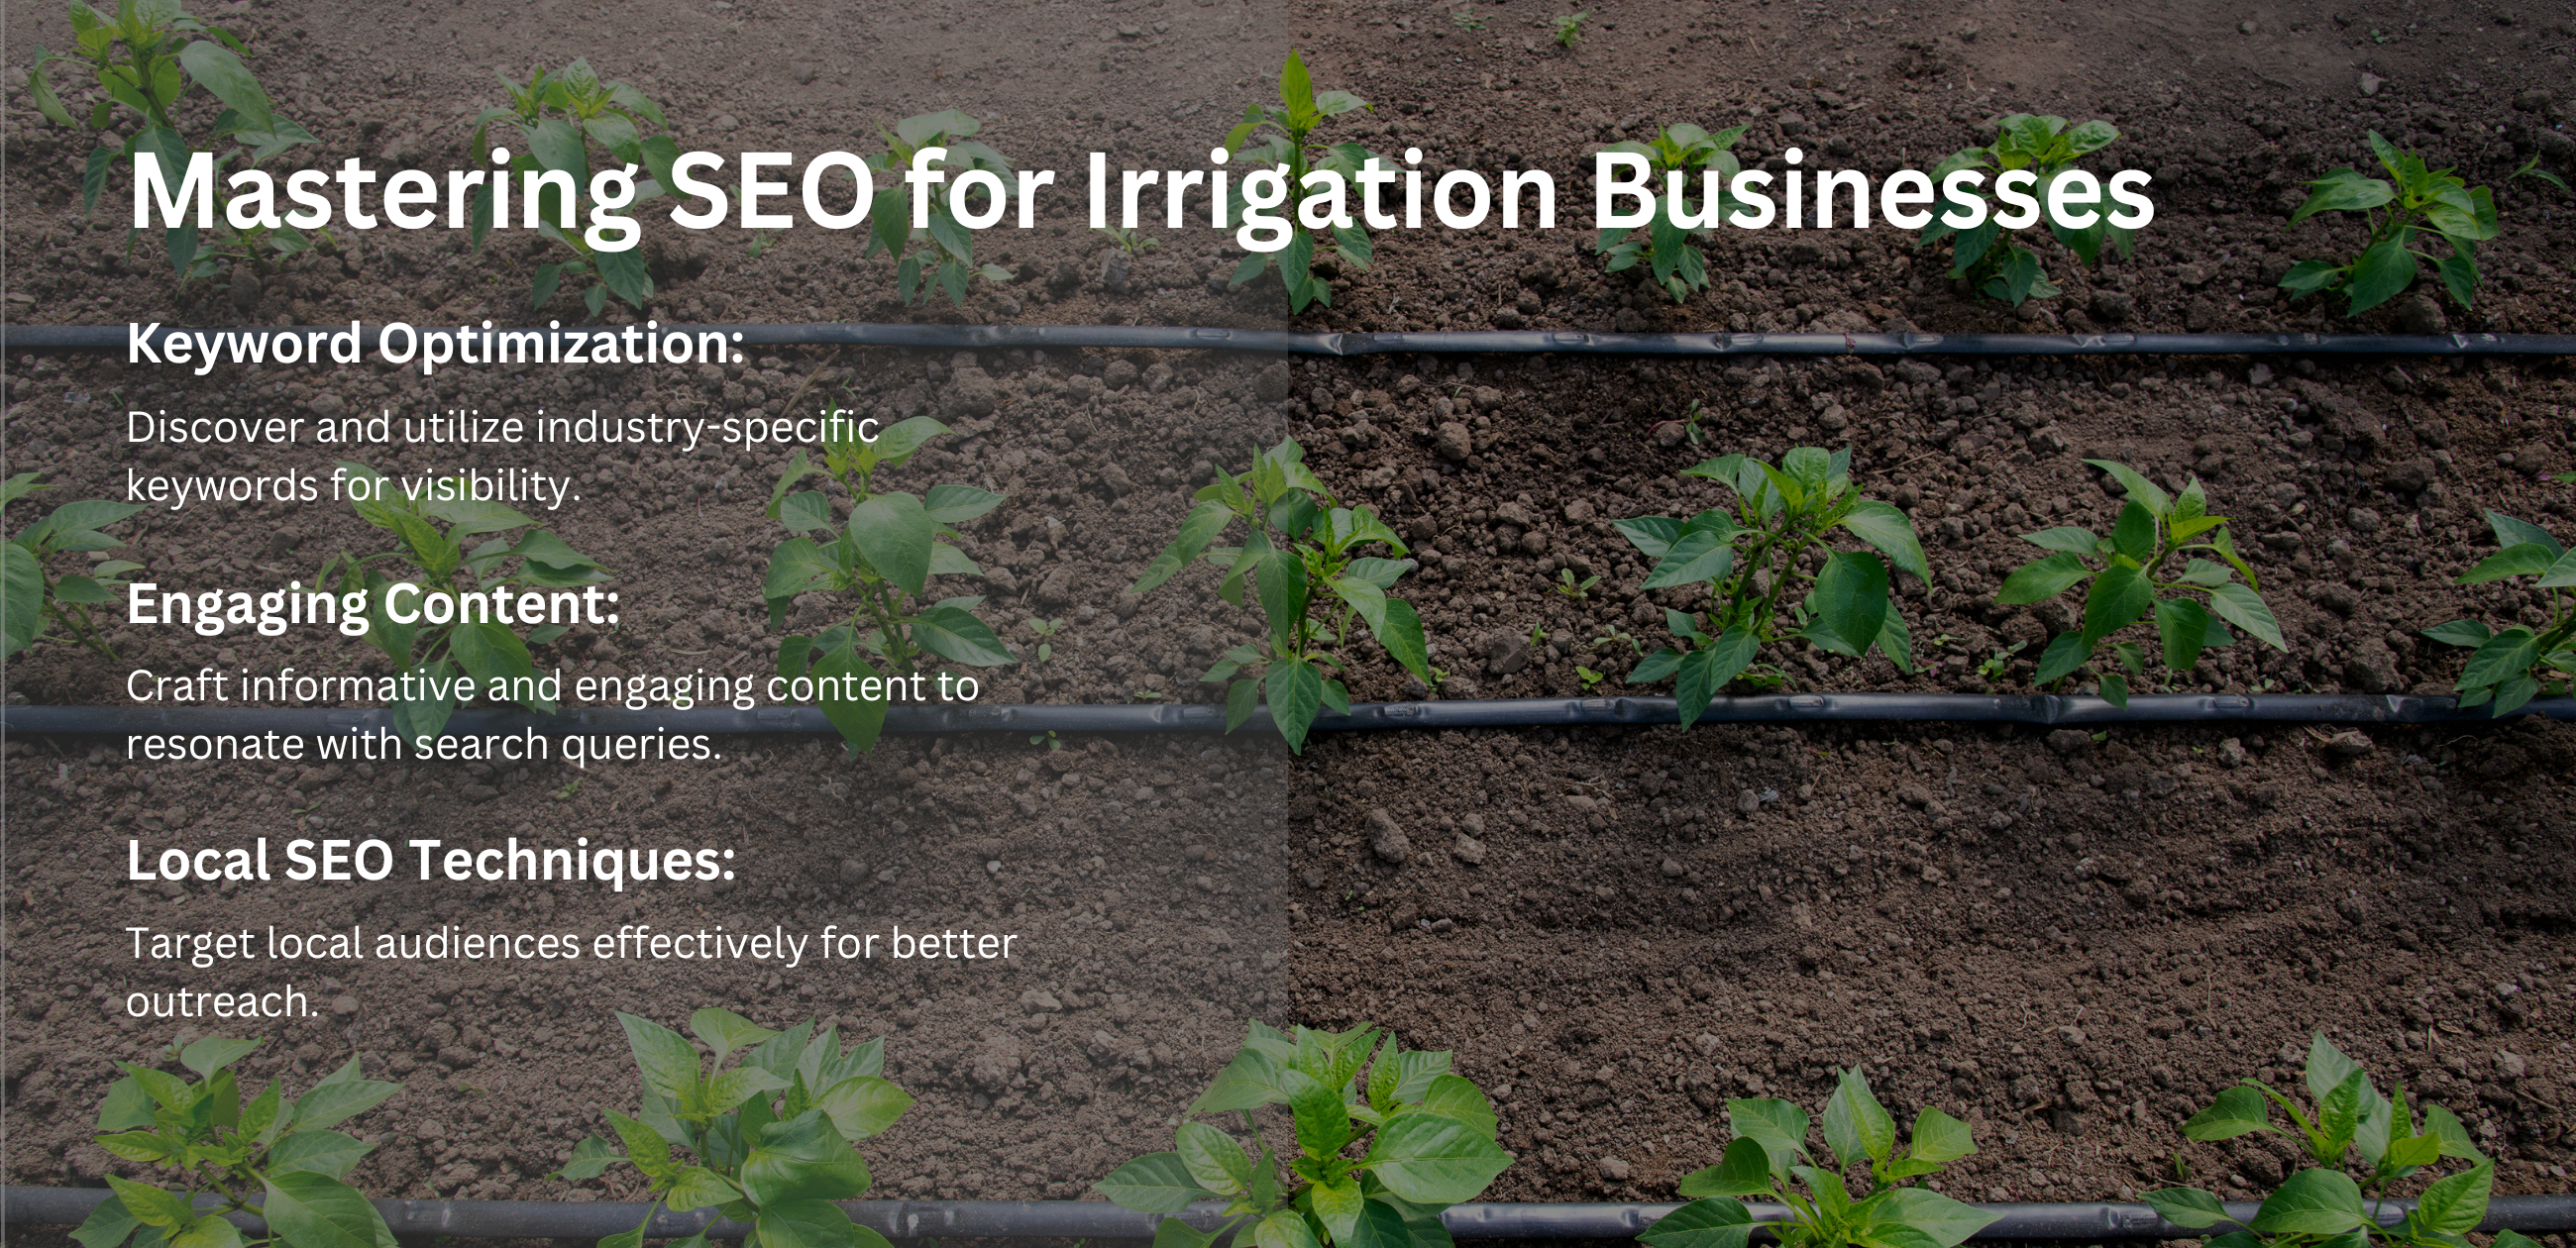 Mastering SEO for Irrigation Businesses